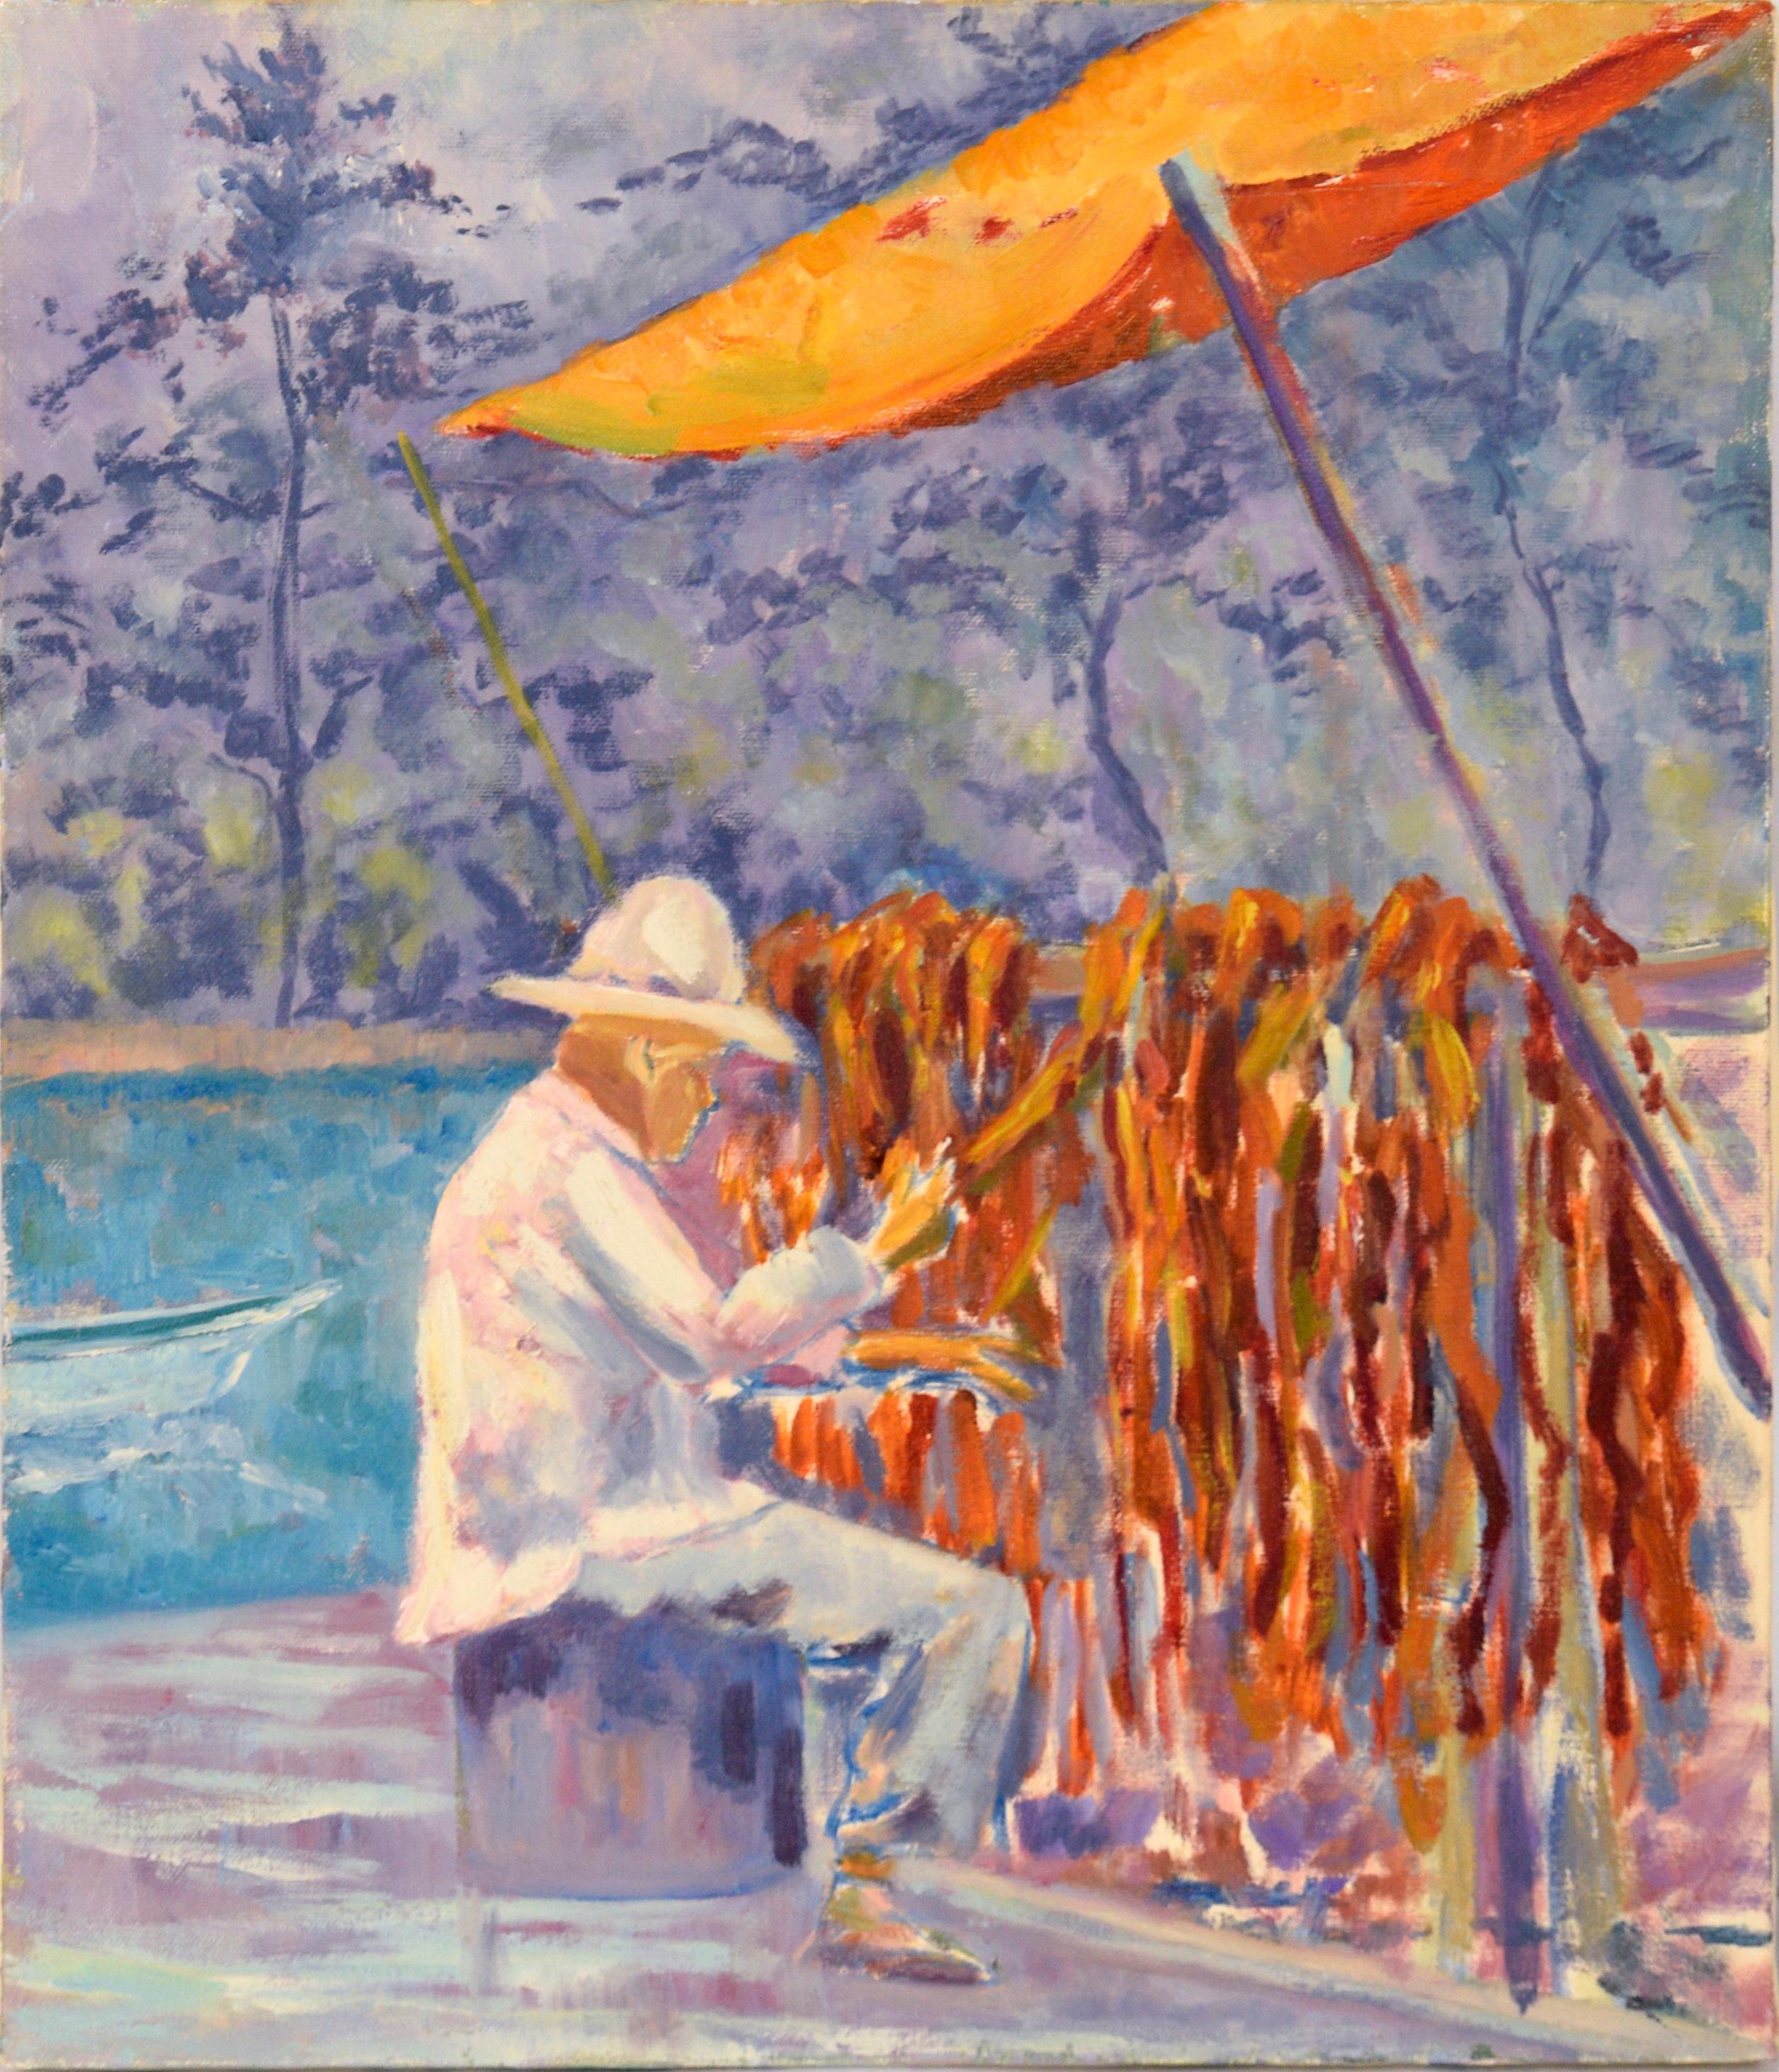 Unknown Figurative Painting - Drying Salmon Native American Smoke Tent - Figurative Oil on Canvas 